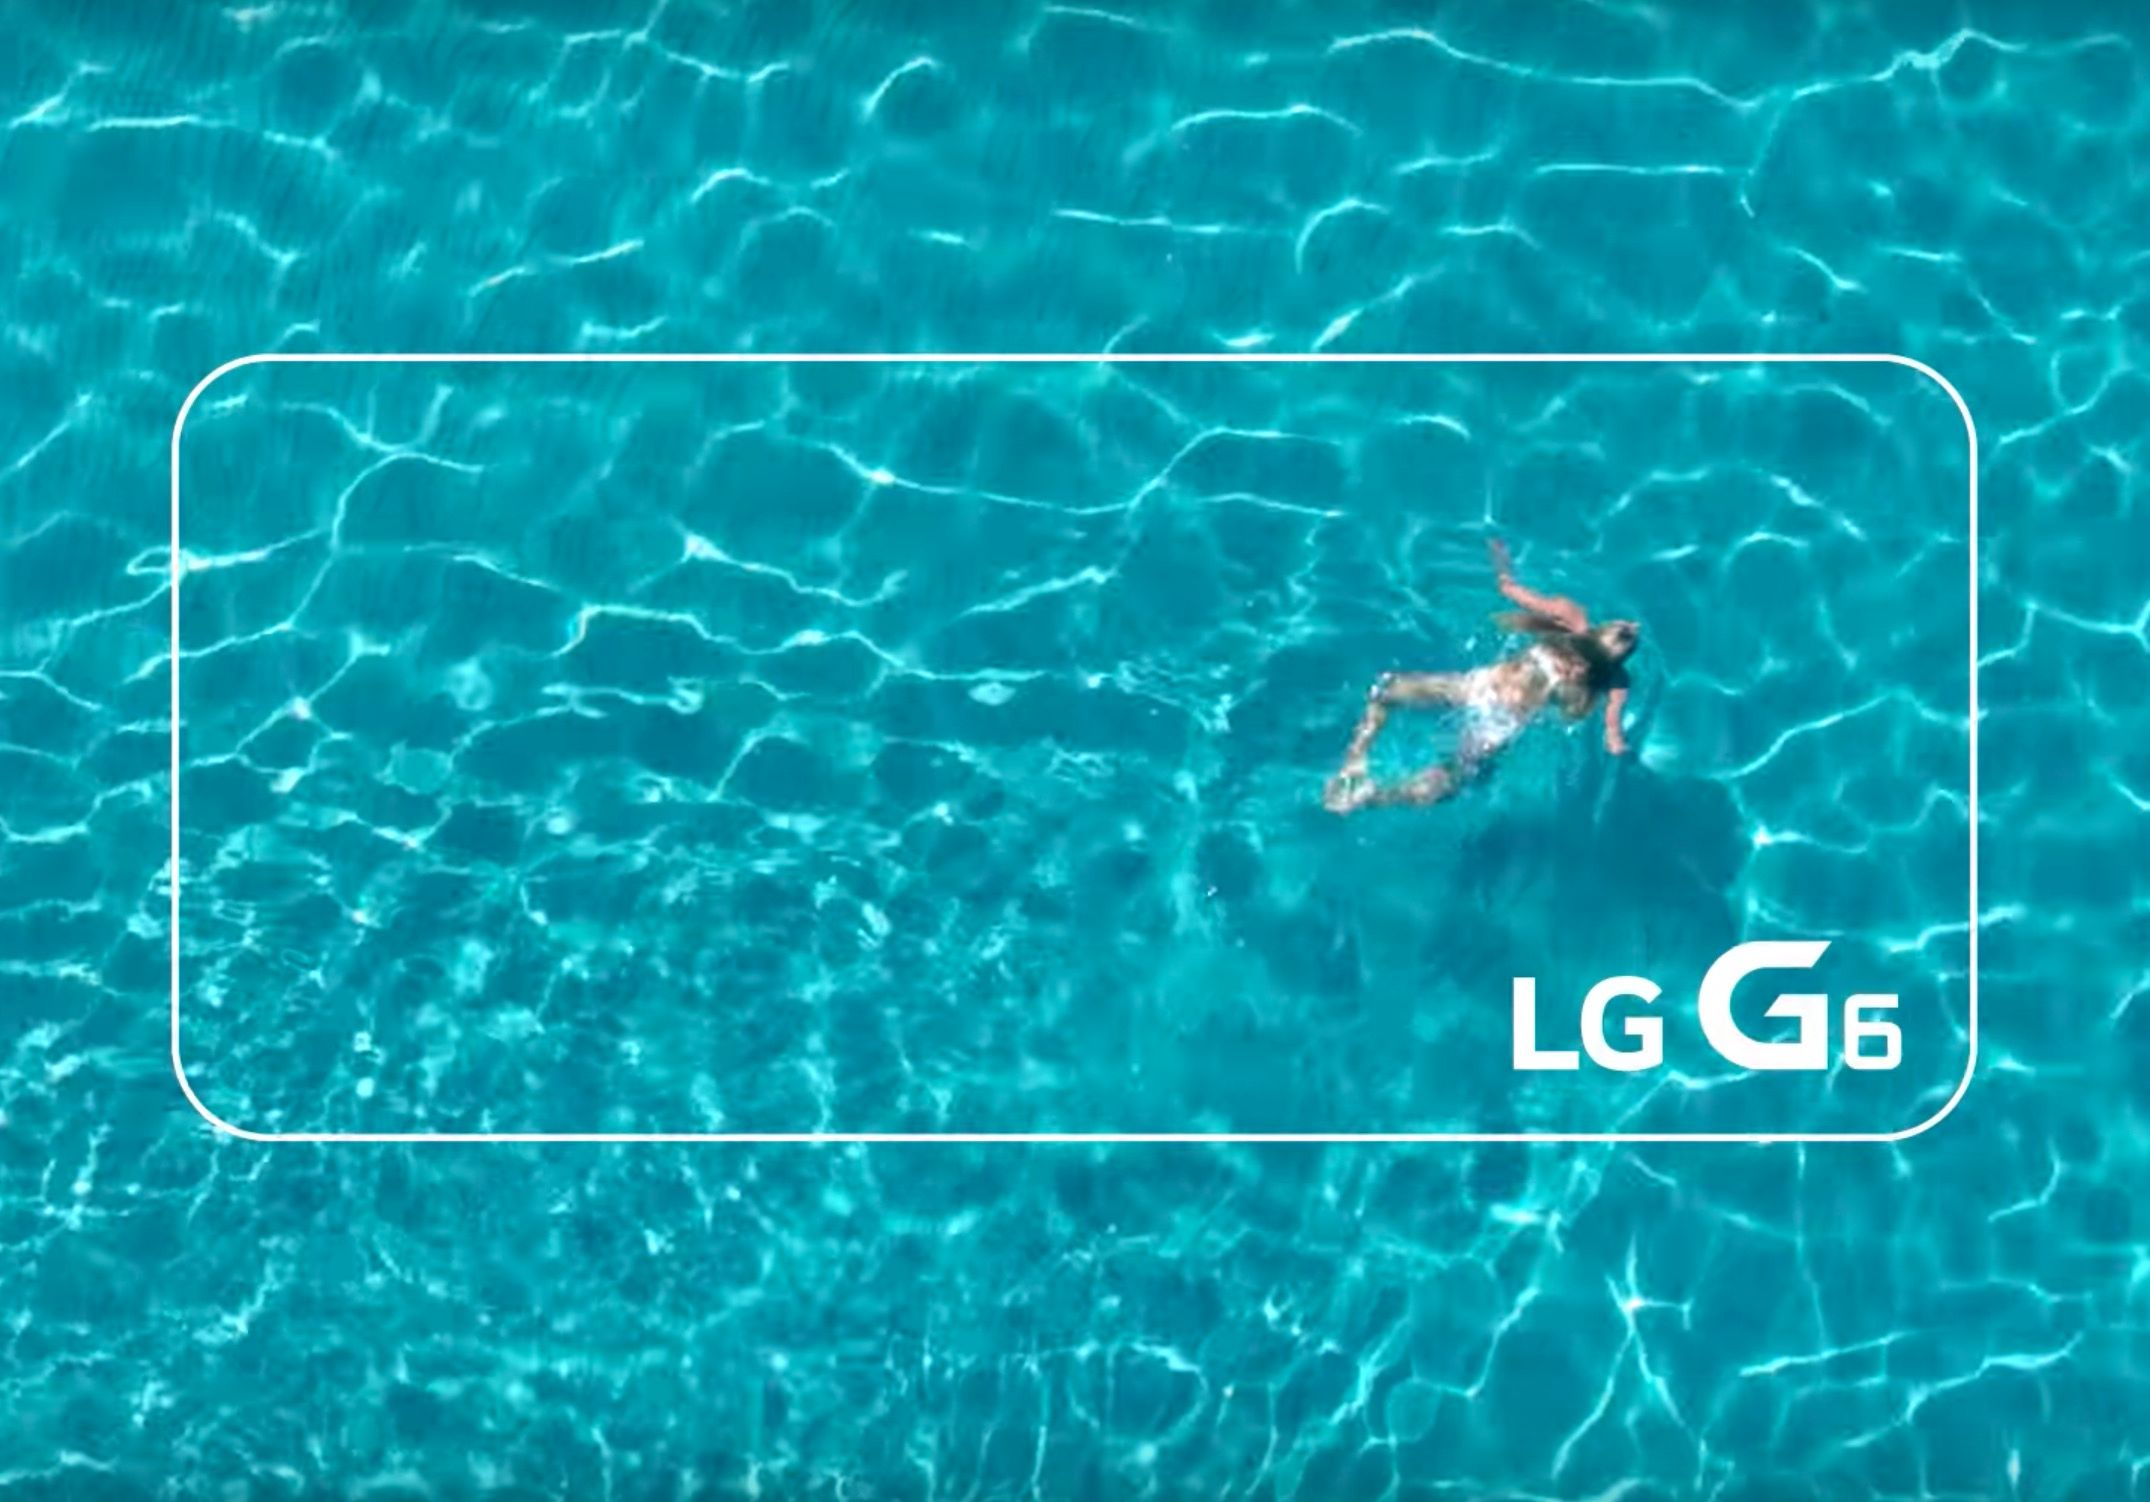 latest lg g6 teasers suggest phone will be water and dust resistant image 1